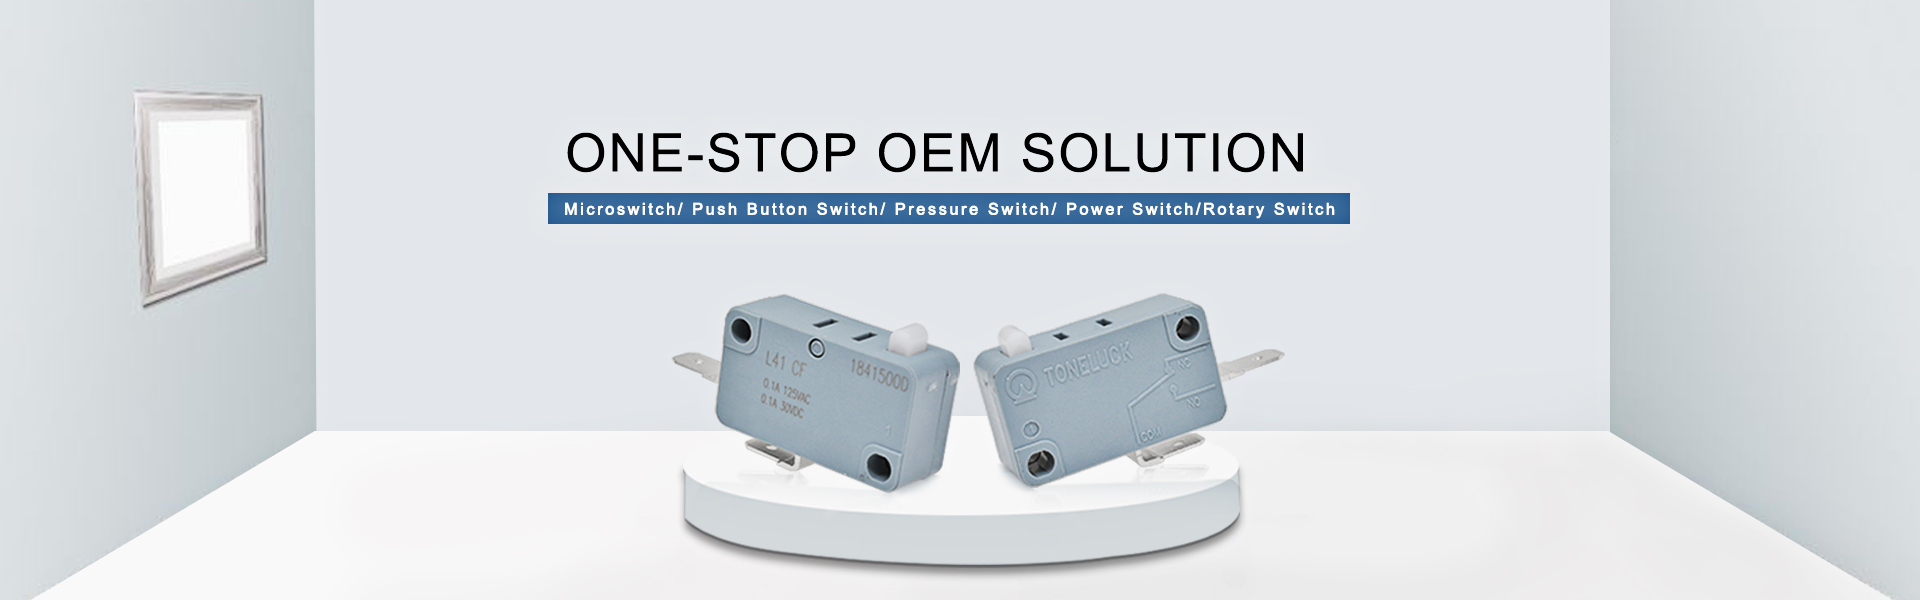 One-Stop OEM Solution Banner 01